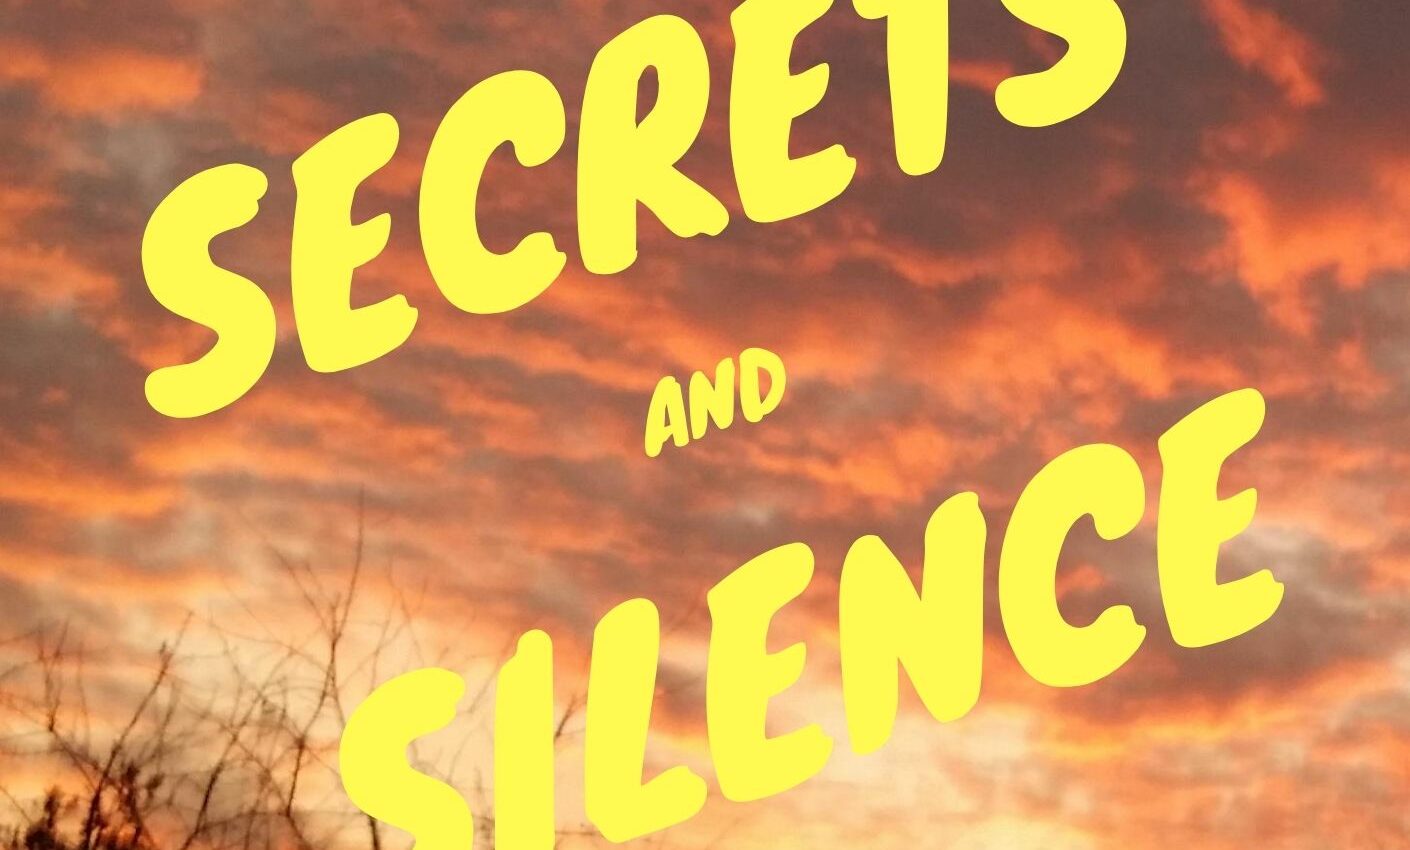 Secrets-and-Silence-Front-Cover-JPG-Aug-28-1